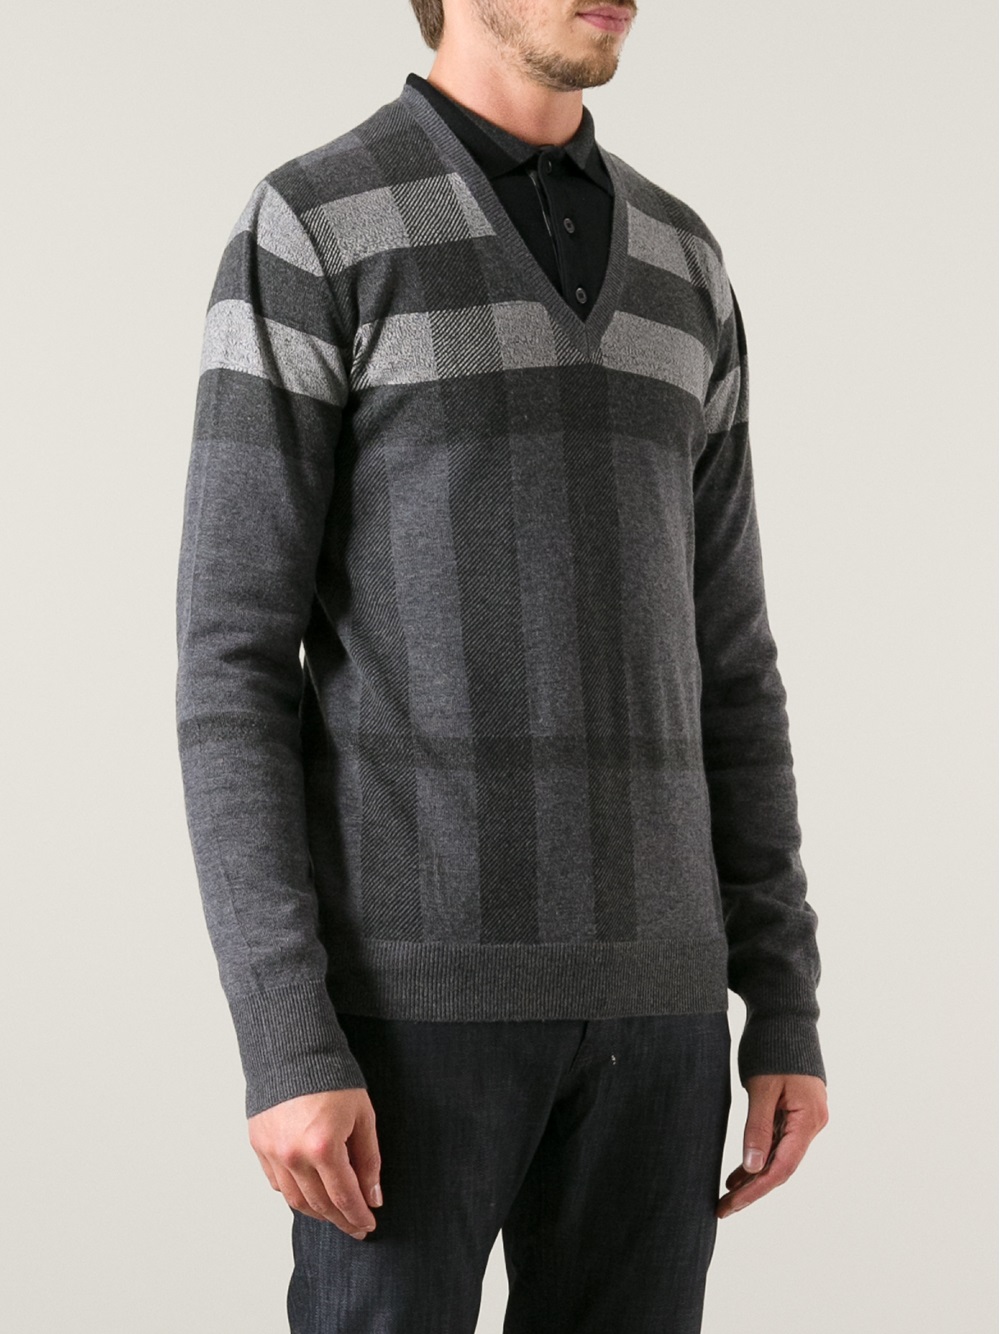 Burberry Check Sweater in Grey (Gray) for Men - Lyst